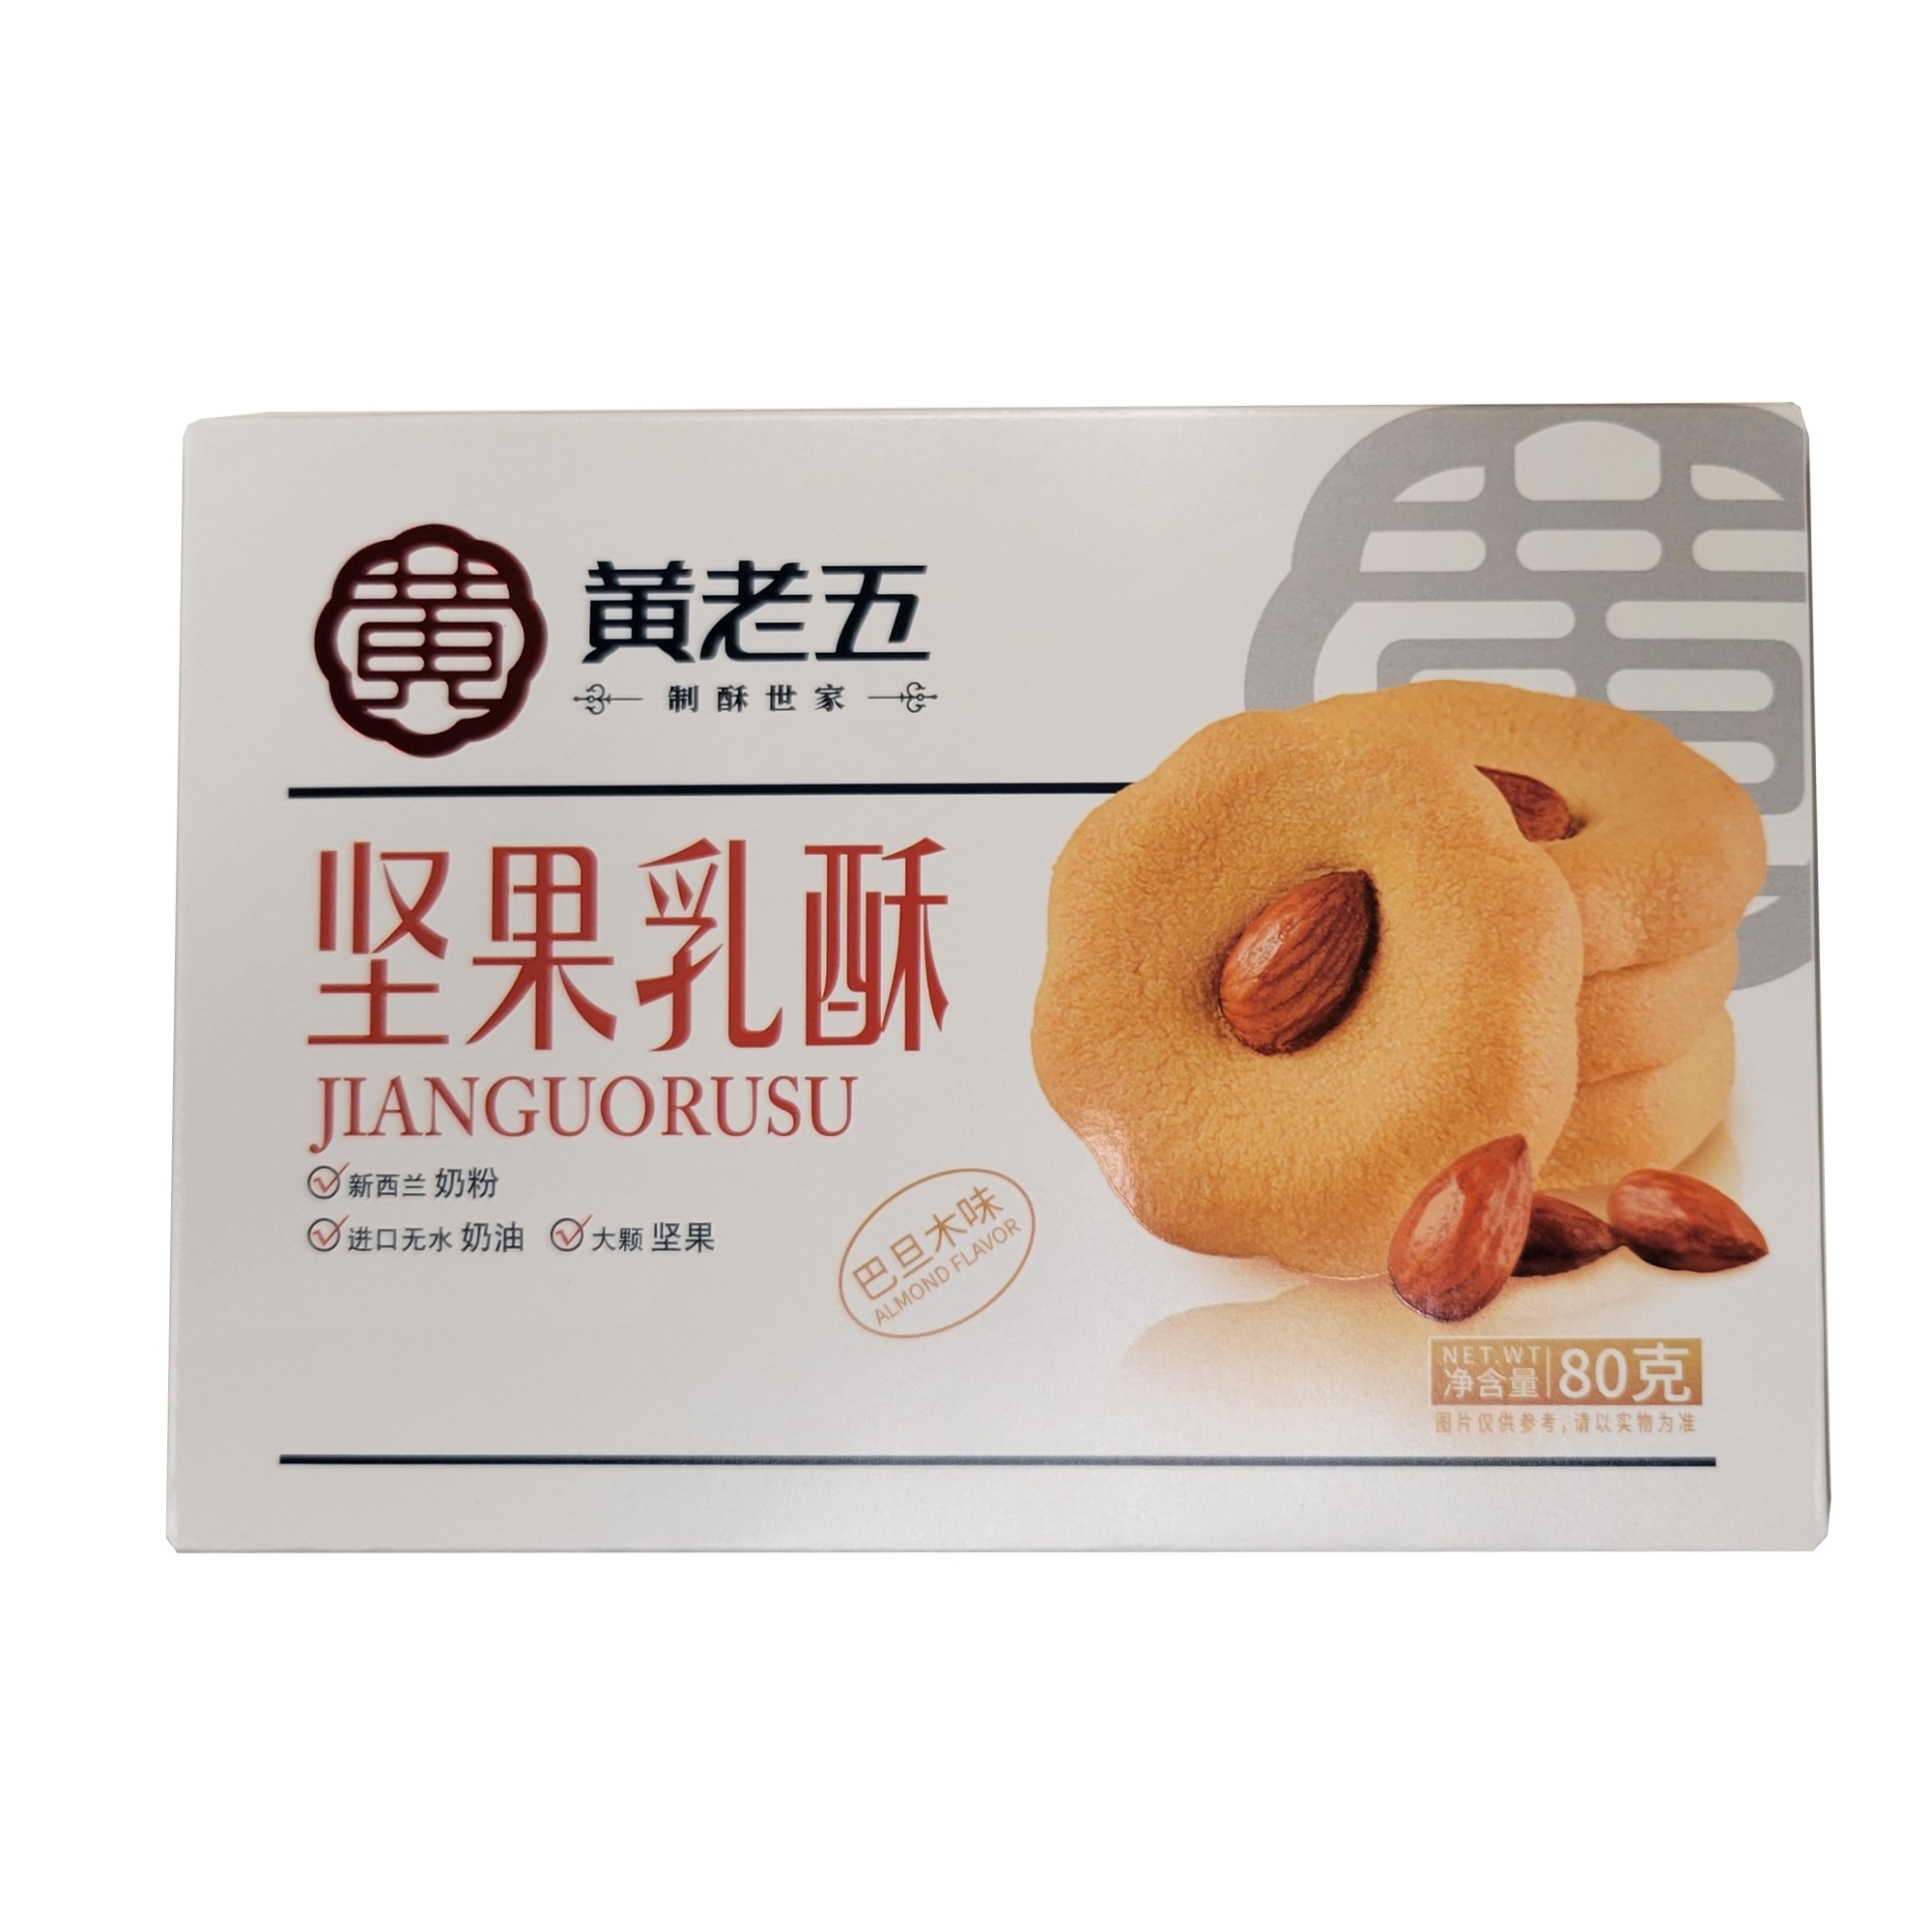 HUANG LAOWU CREAM COOKIE ALMOND FLAVOR SN139035